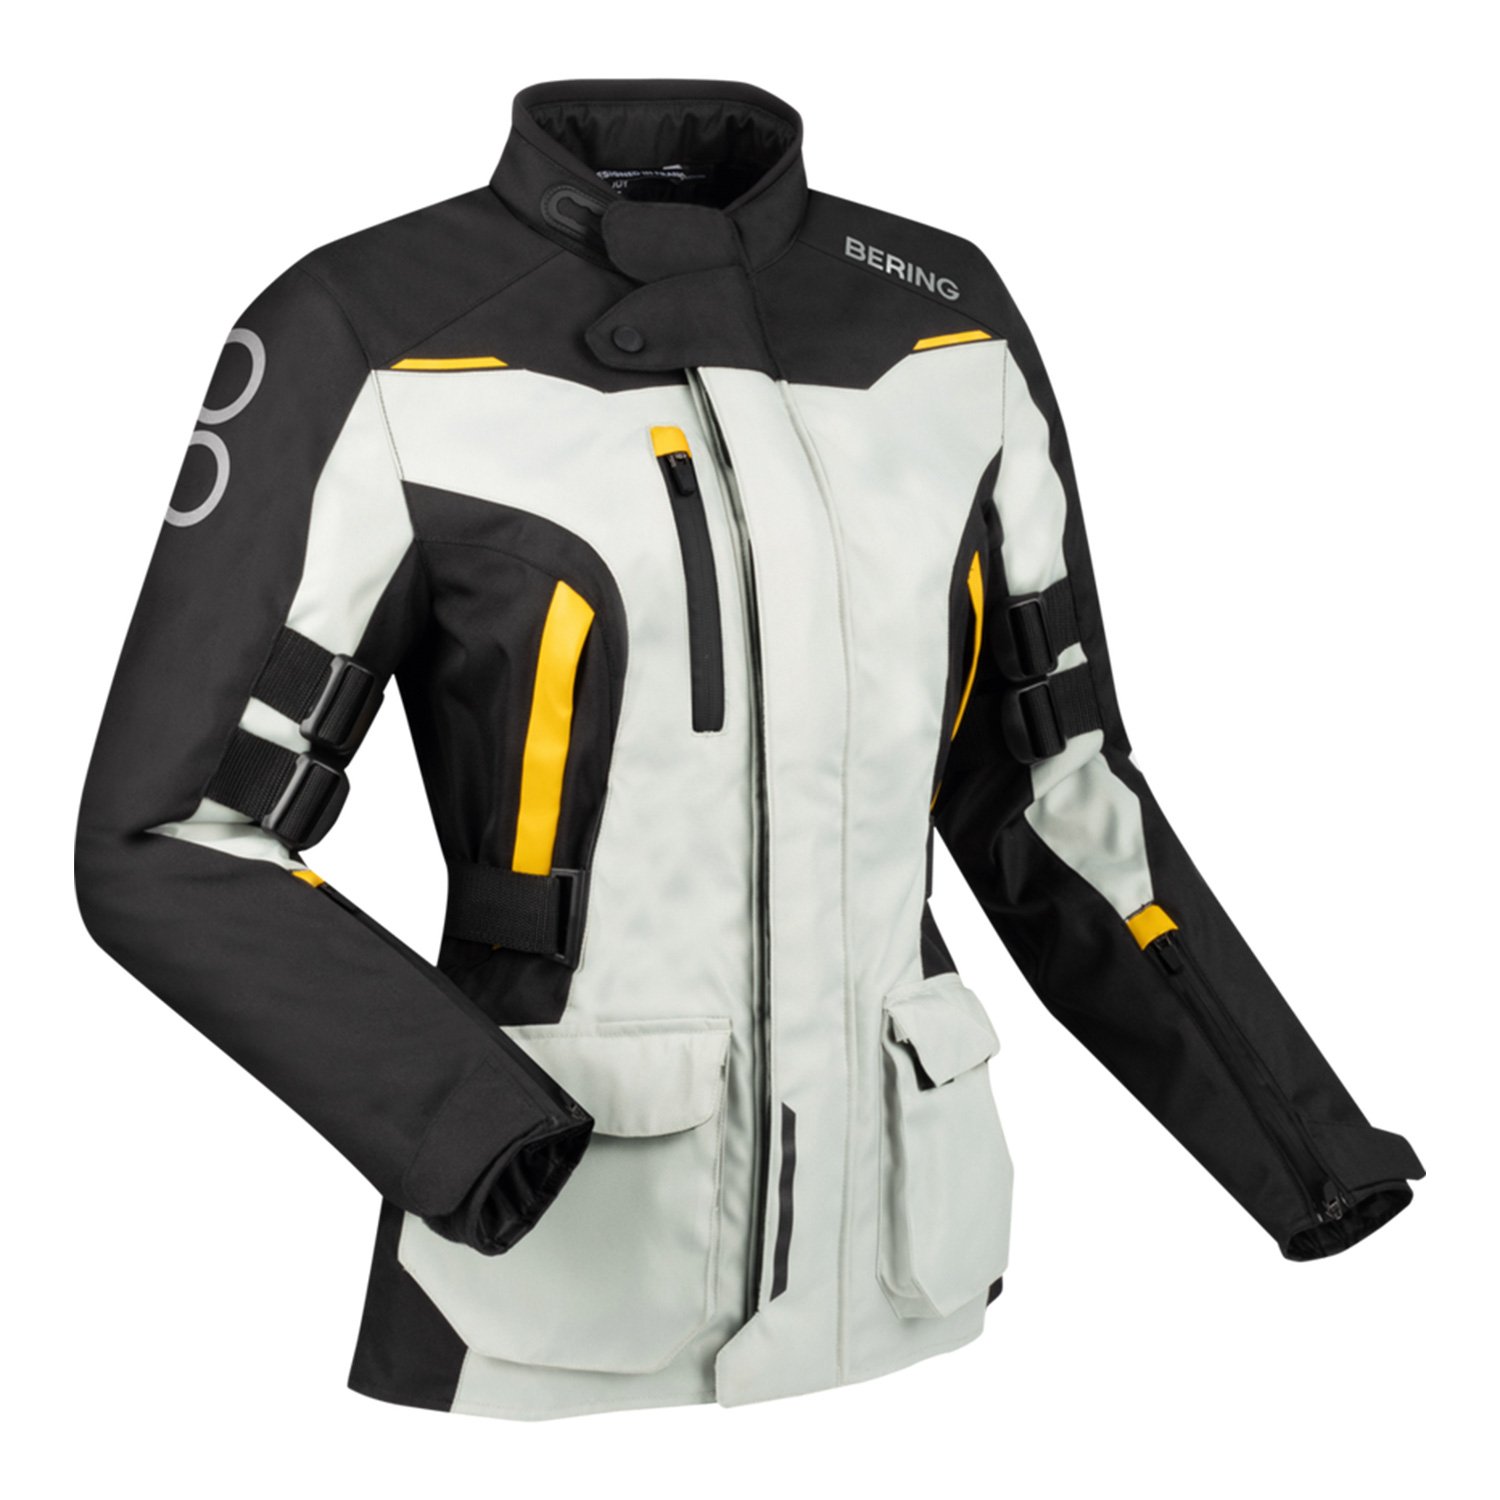 Image of Bering Lady Zephyr Jacket Black Grey Yellow Taille T5